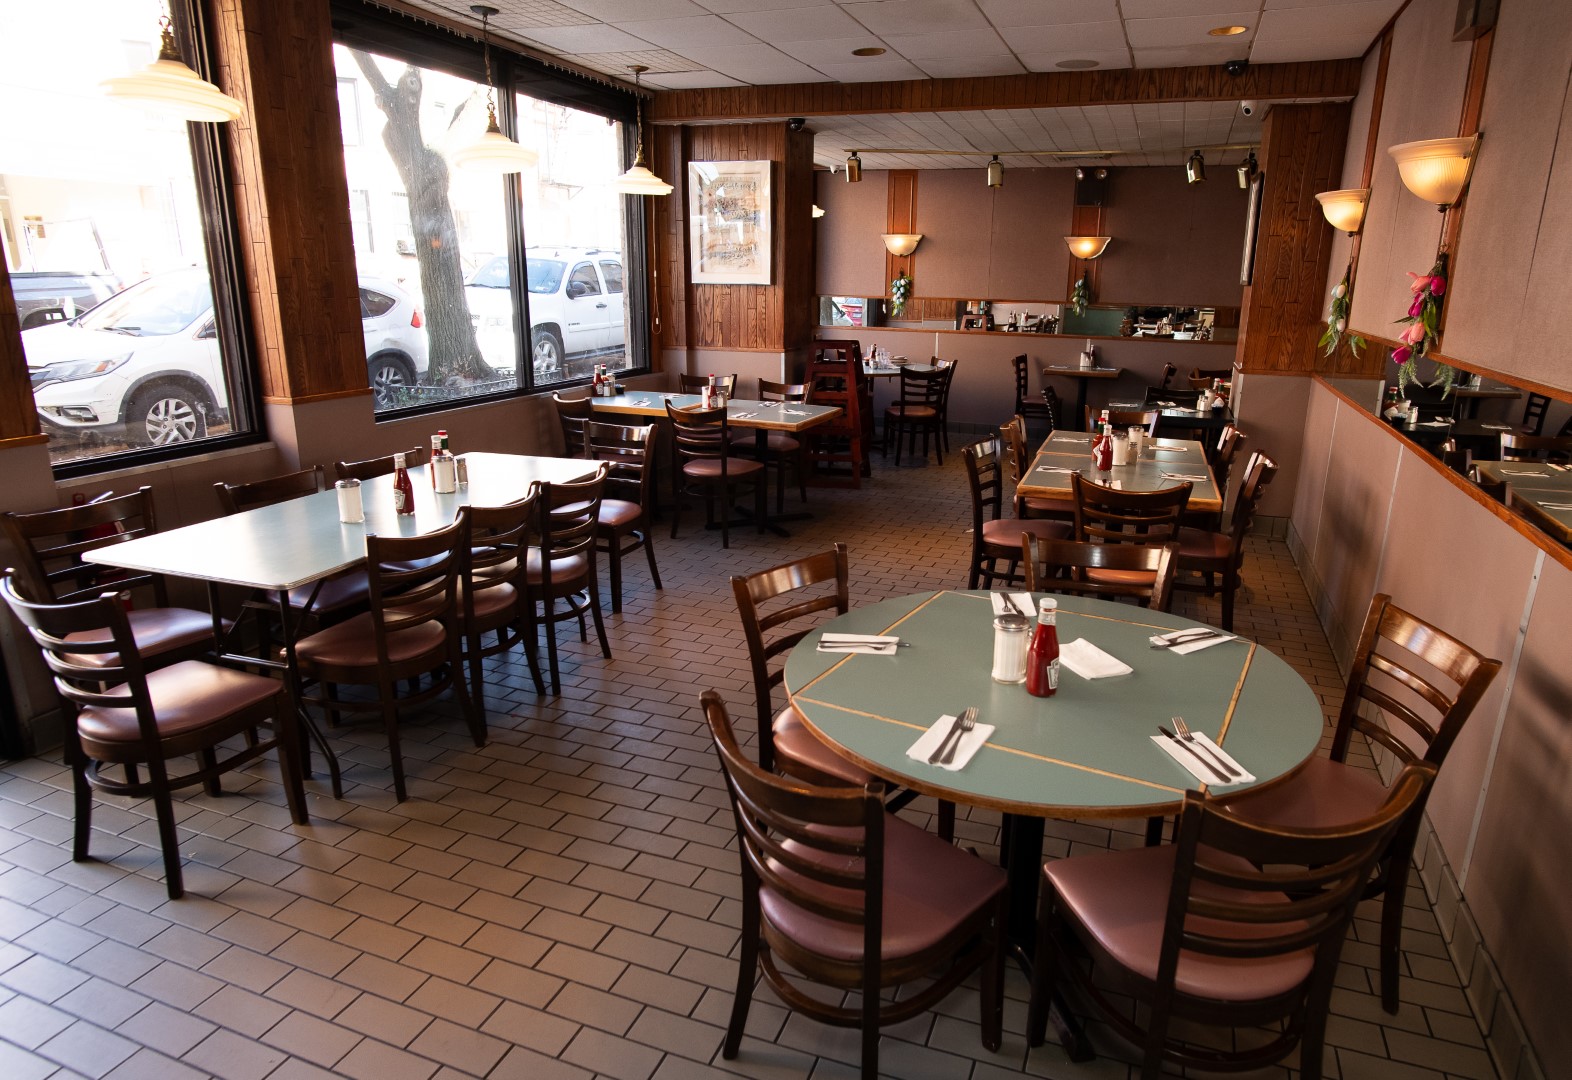 Interior of a casual dining restaurant with multiple empty tables and chairs, tiled floor, and large windows with street view. each table is set with condiments and napkins.